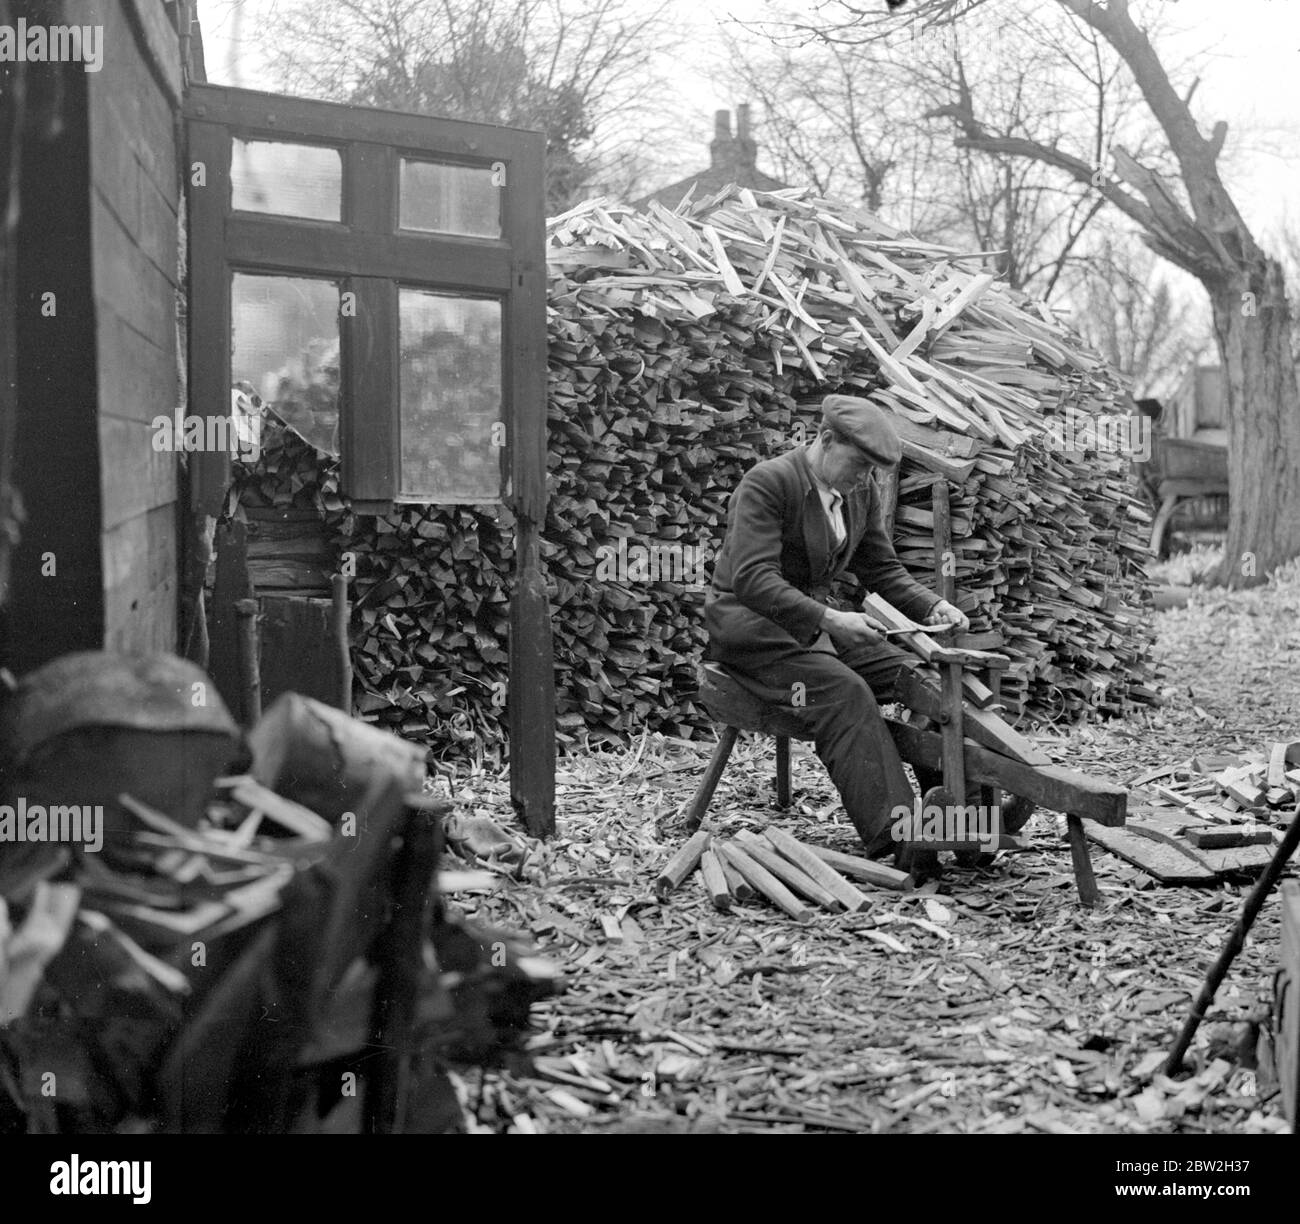 A Primitive Industry. One of the oldest industries in this country is carried on in the woods at High Wycombe, Bucks, whence for hundreds of years, chair legs, tent pegs, etc, have been made by hands, the trees being felled and split and turned without the aid of machinery. February 1934 Stock Photo